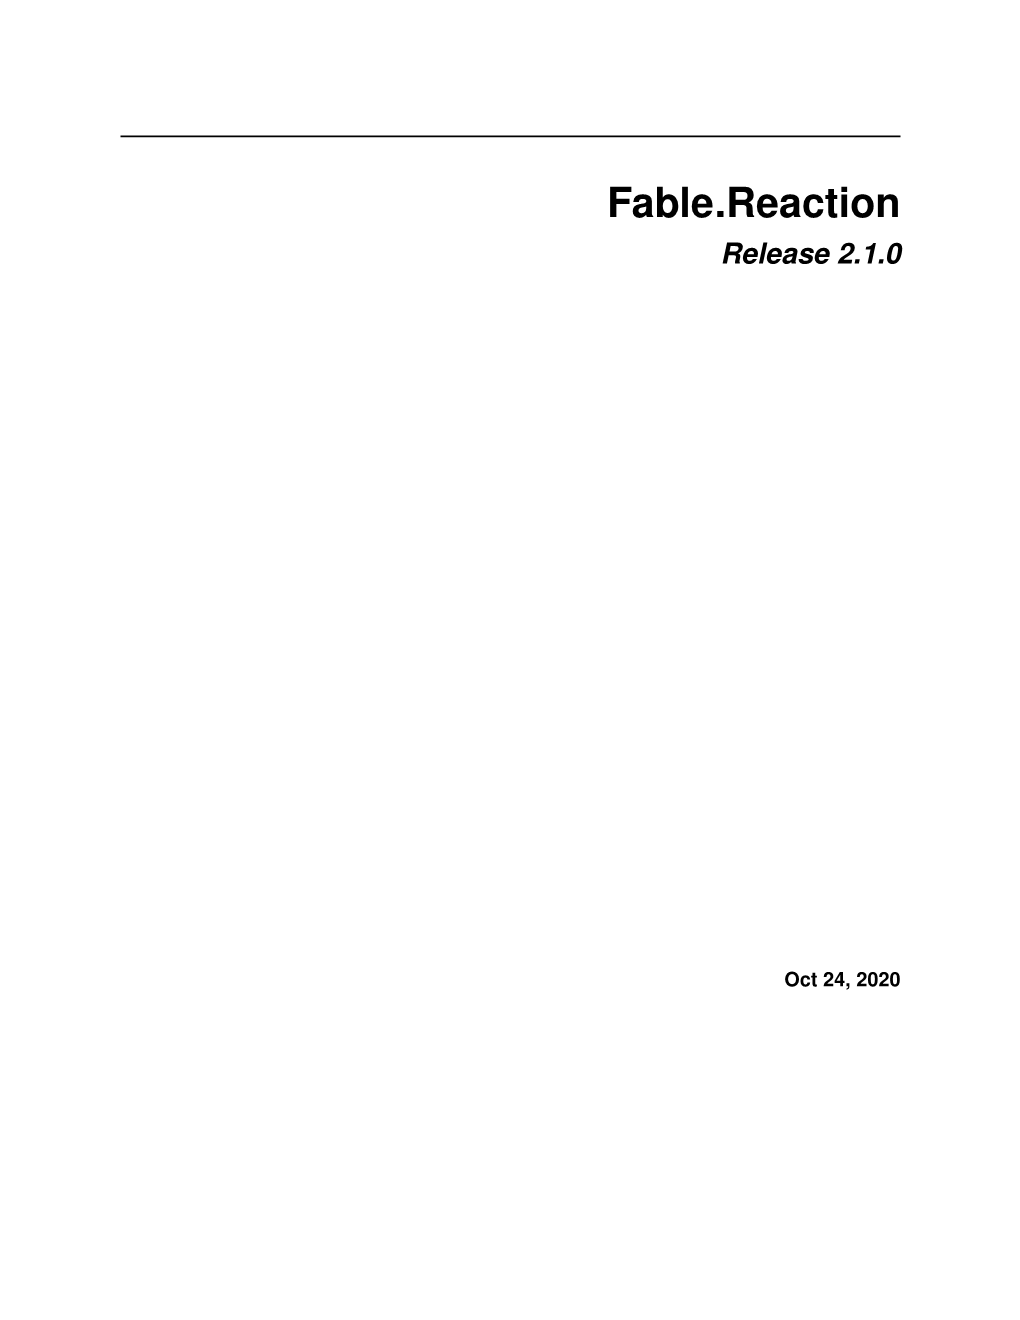 Fable.Reaction Release 2.1.0